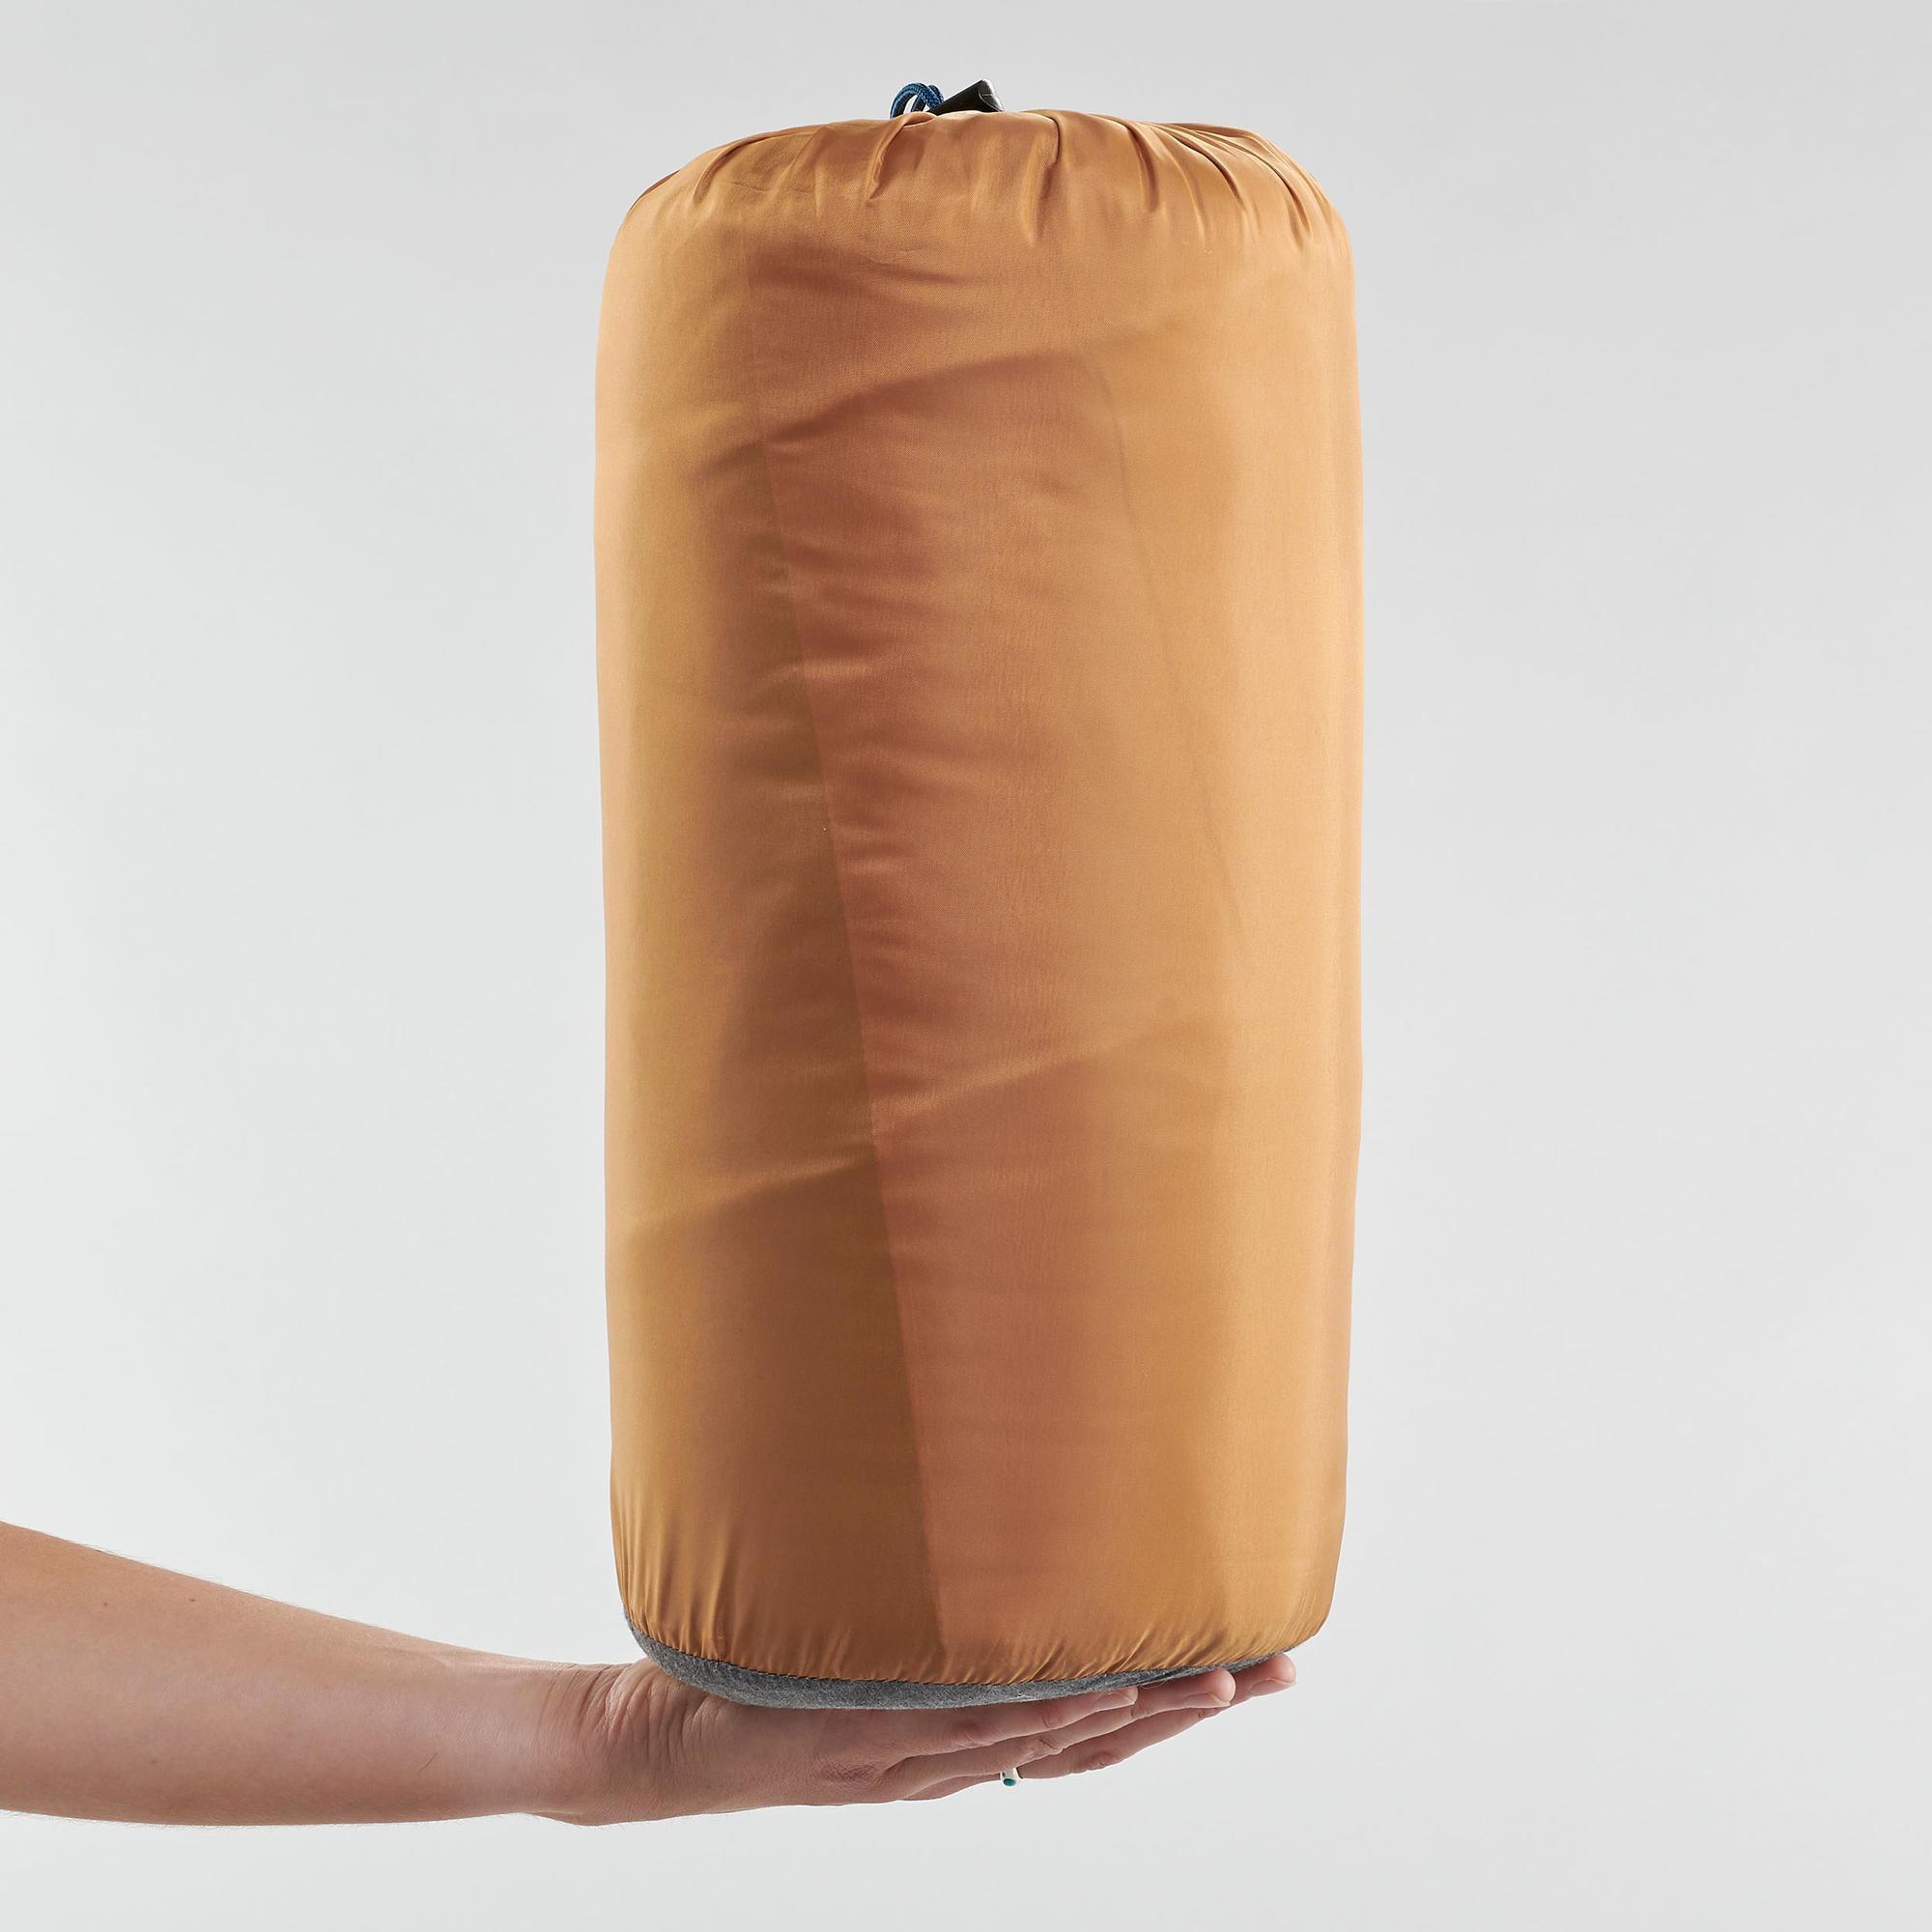 COTTON SLEEPING BAG FOR CAMPING - ARPENAZ 20° COTTON 3/7